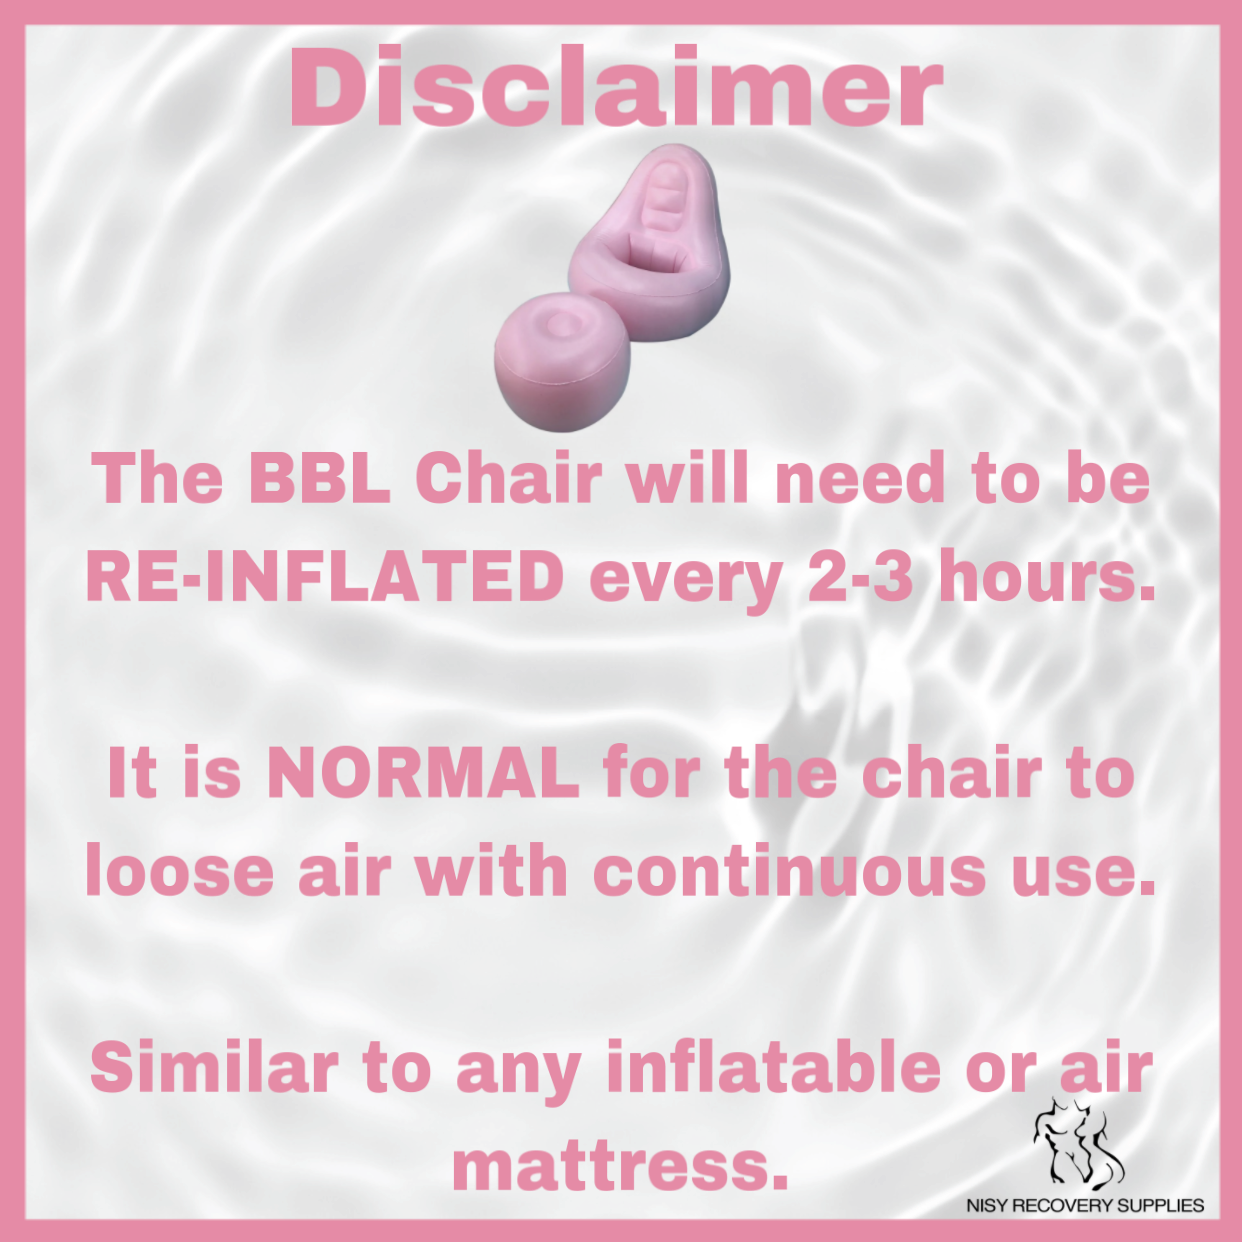 BBL Chair After Surgery with Built-in Air Pump